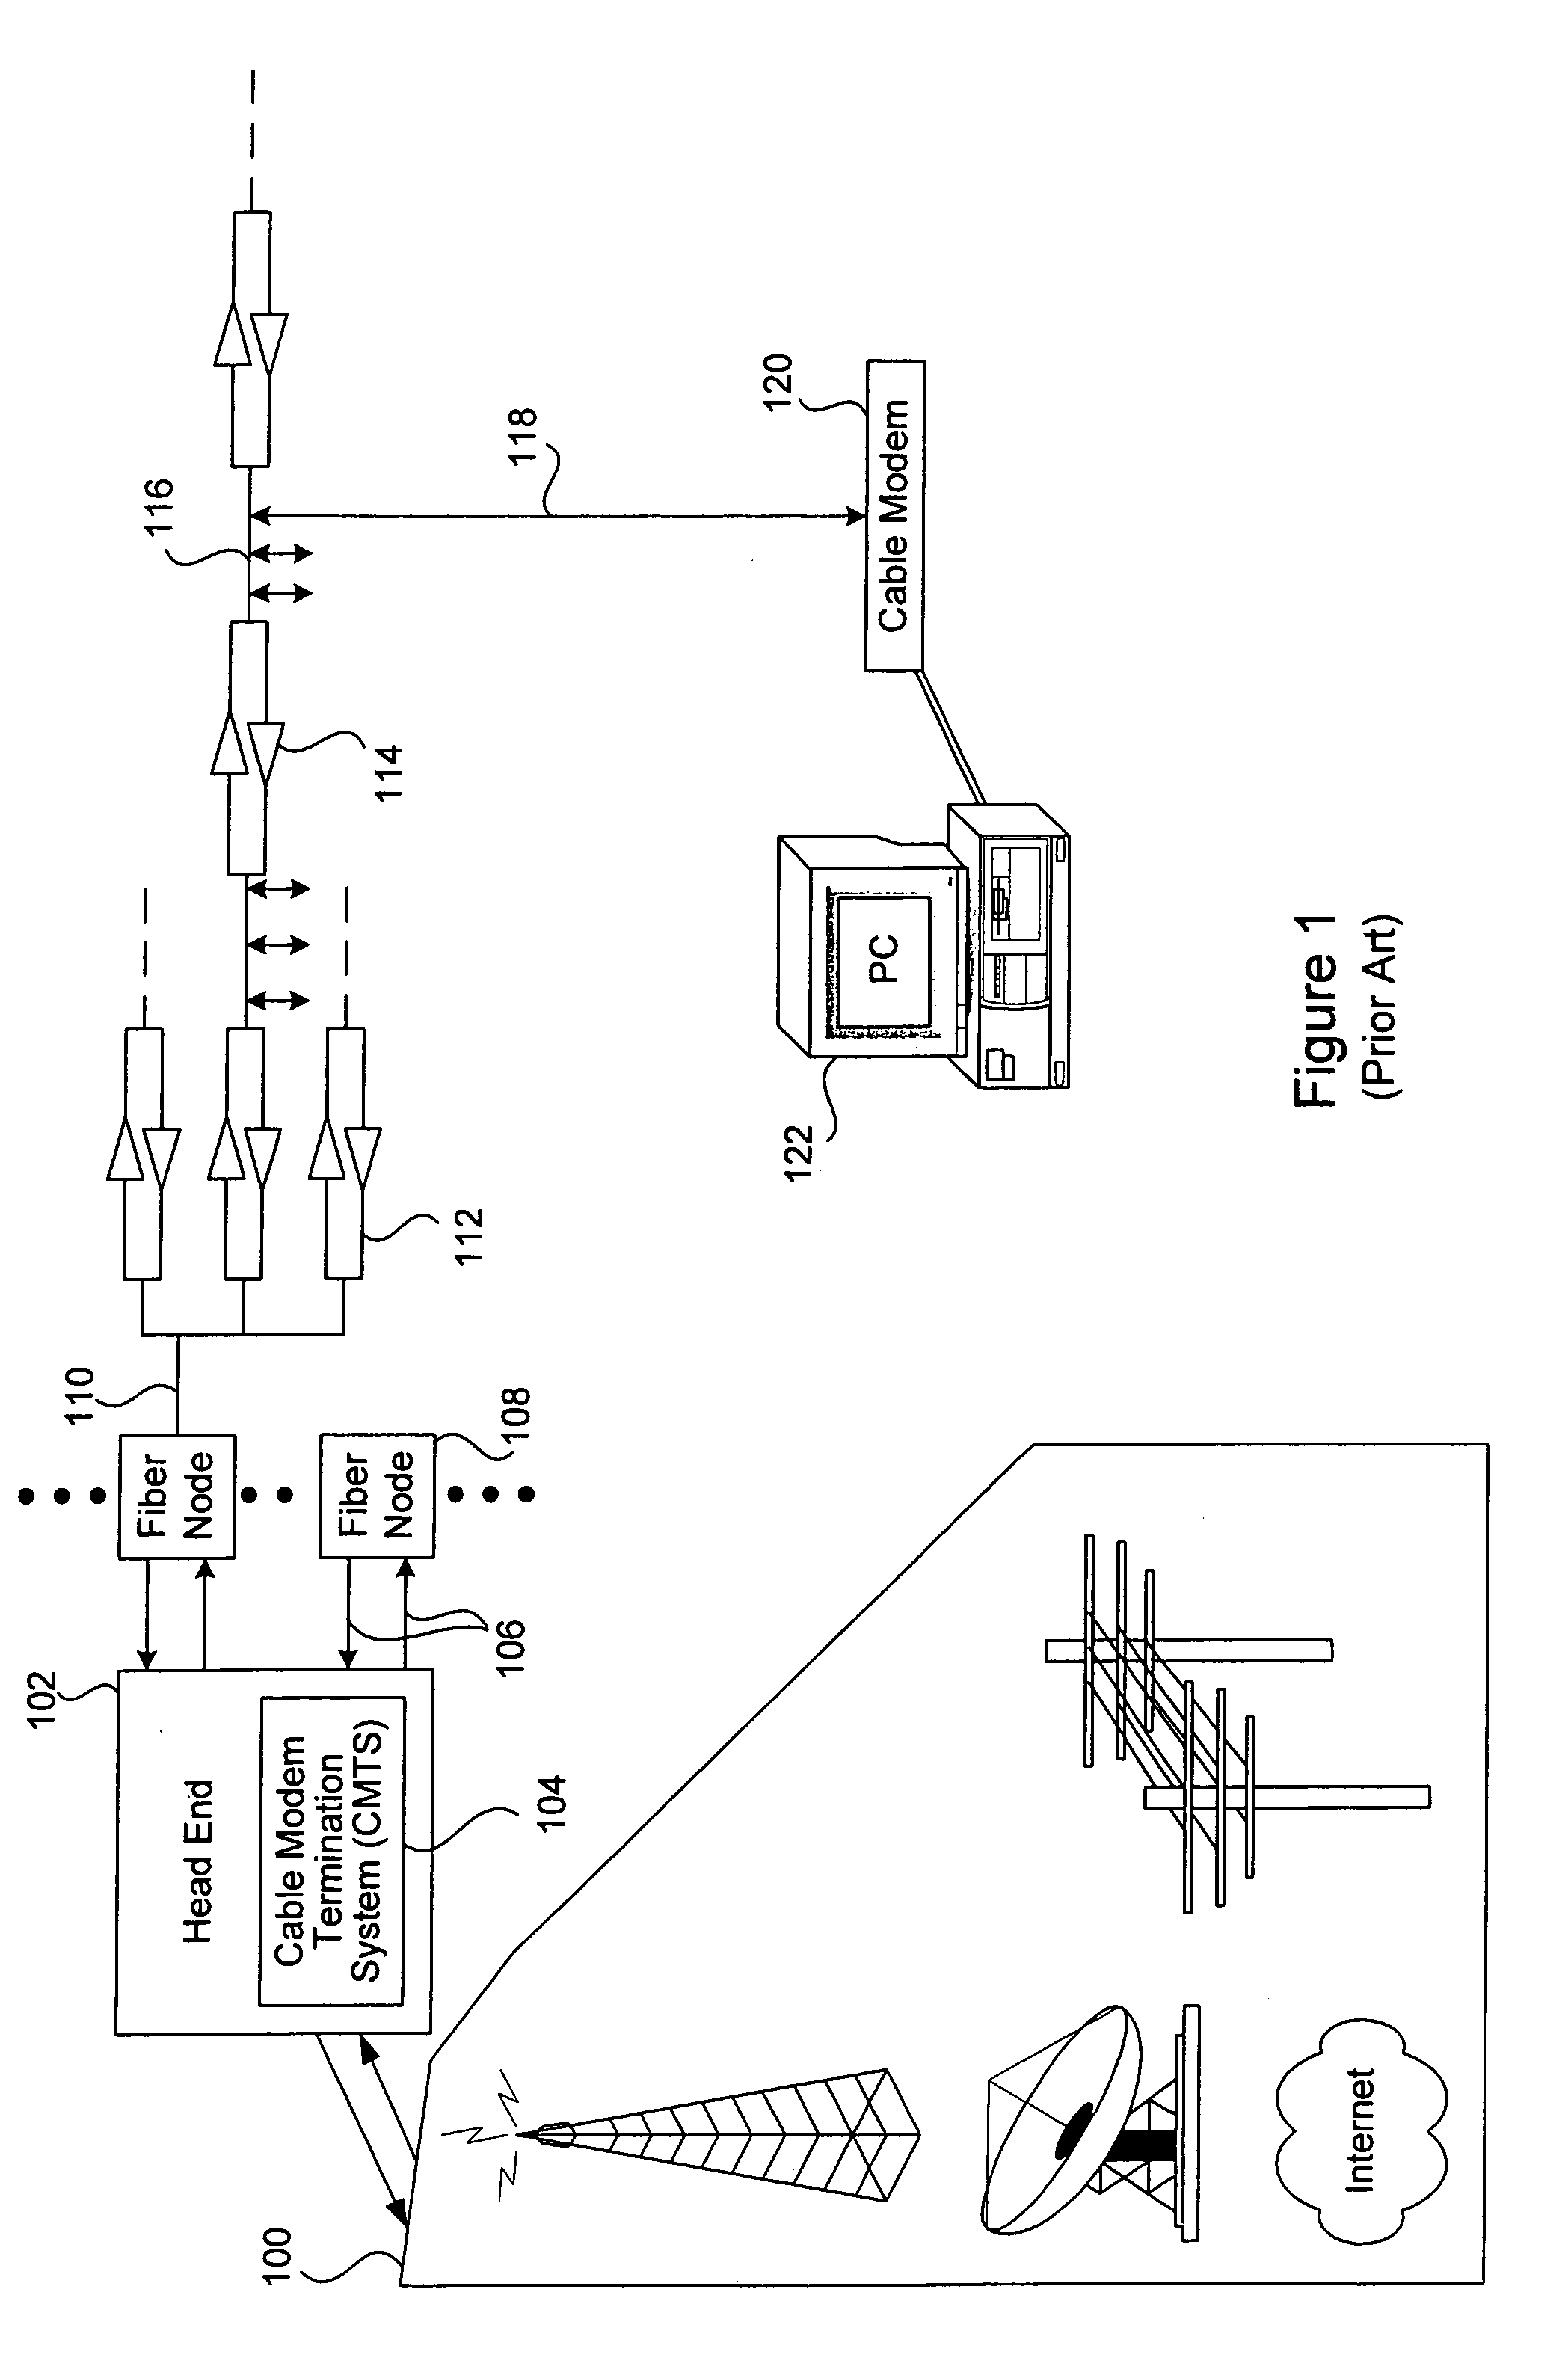 Data transmission over multiple upstream channels within a cable modem system